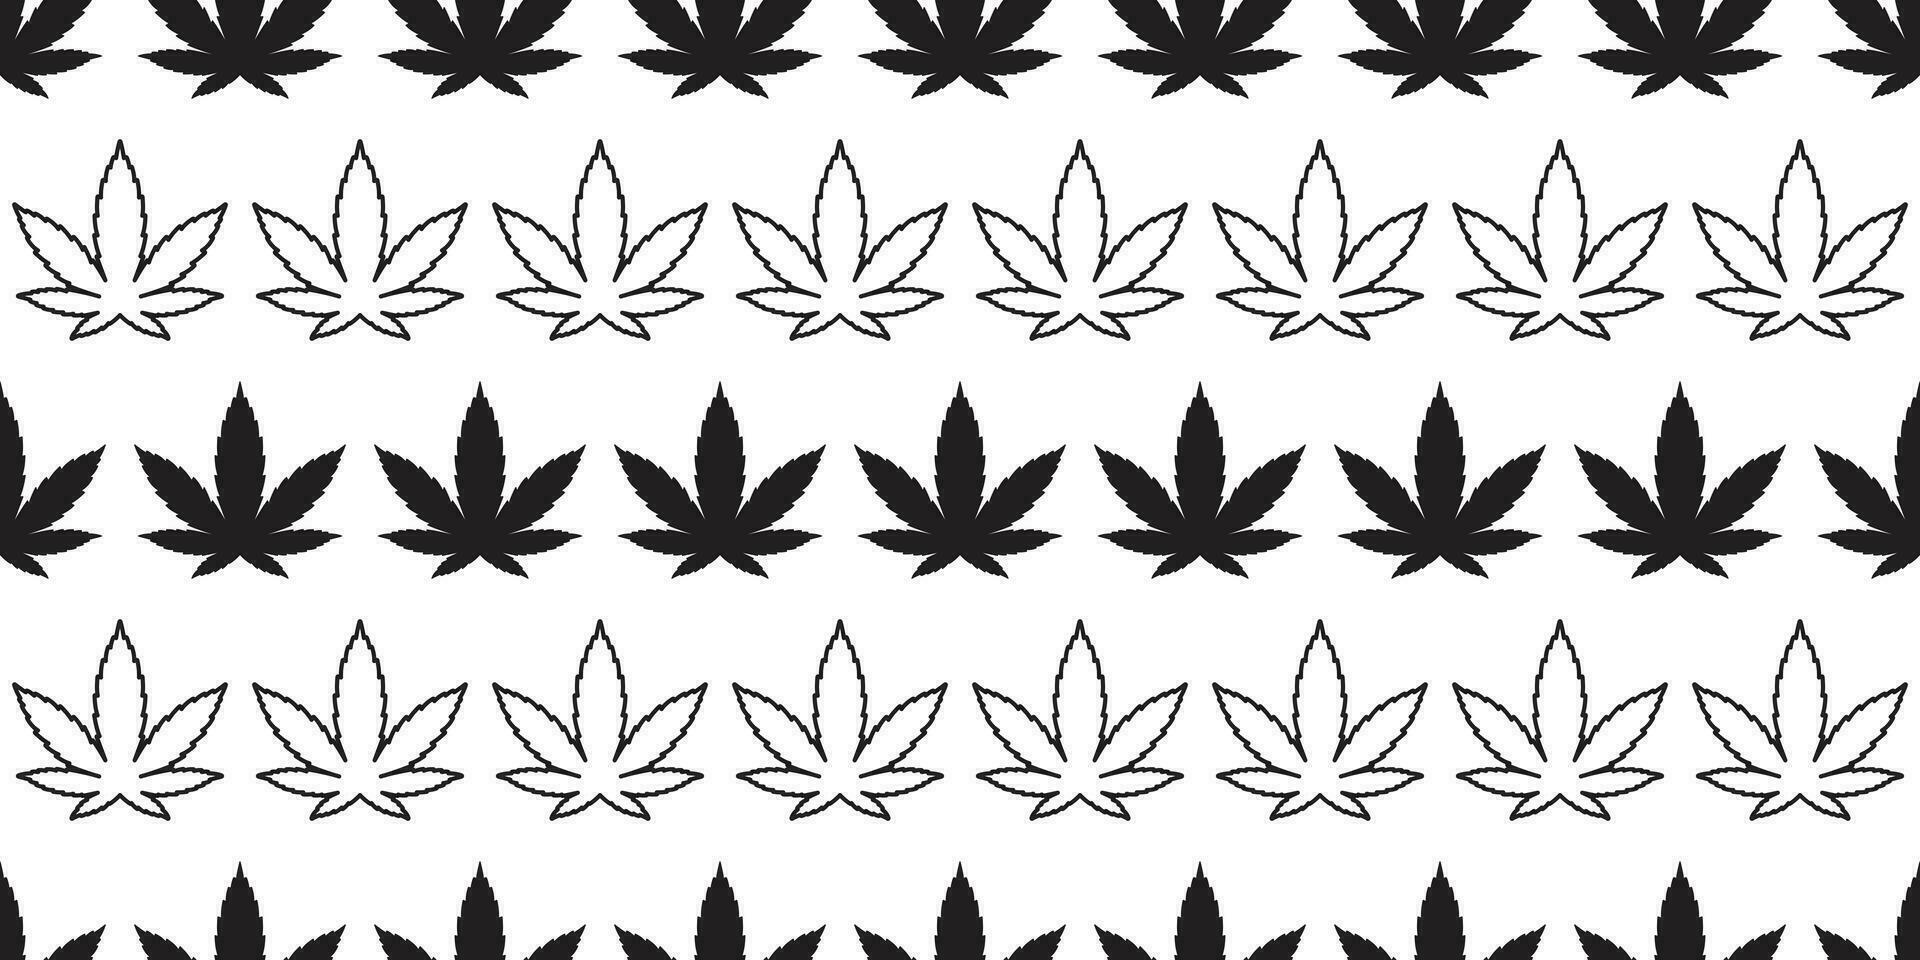 Marijuana seamless pattern cannabis vector weed leaf tile background repeat wallpaper scarf isolated illustration